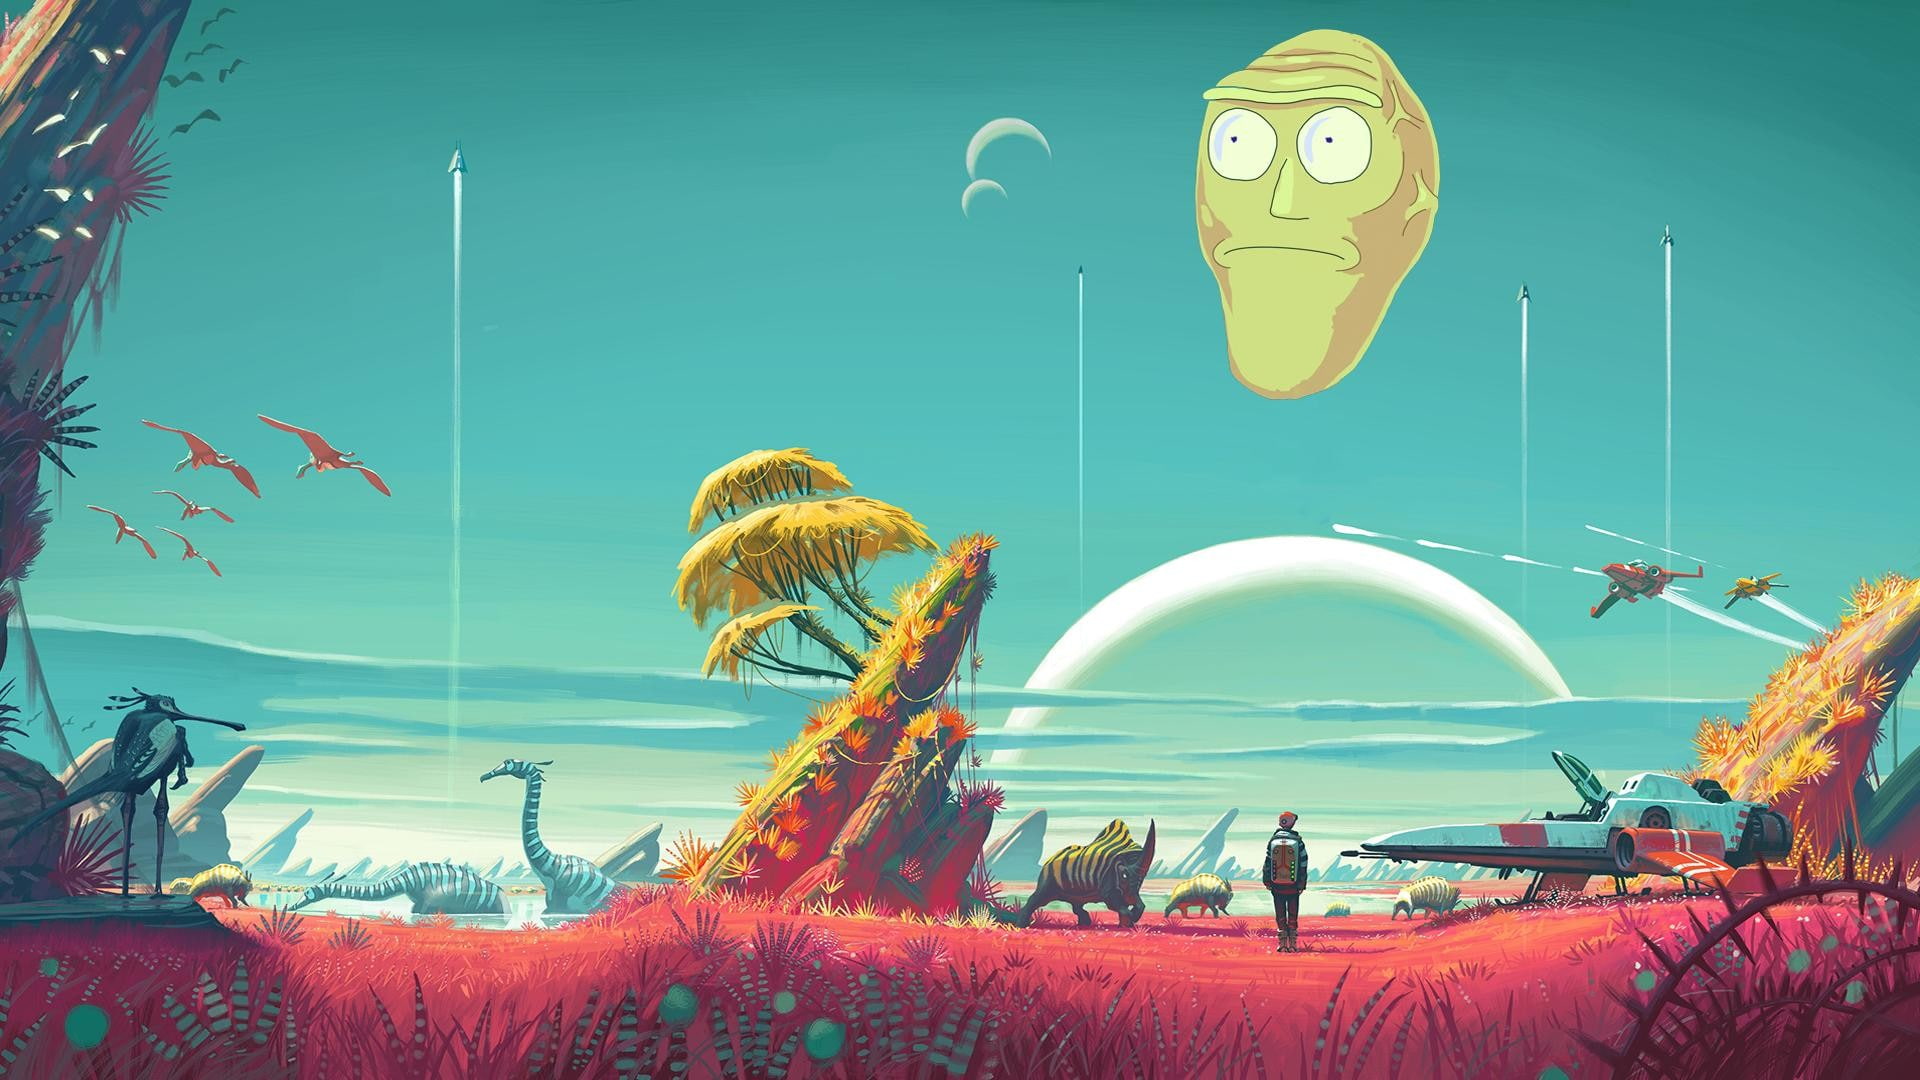 Rick and Morty  floating heads  fan art  humor  No Mans Sky